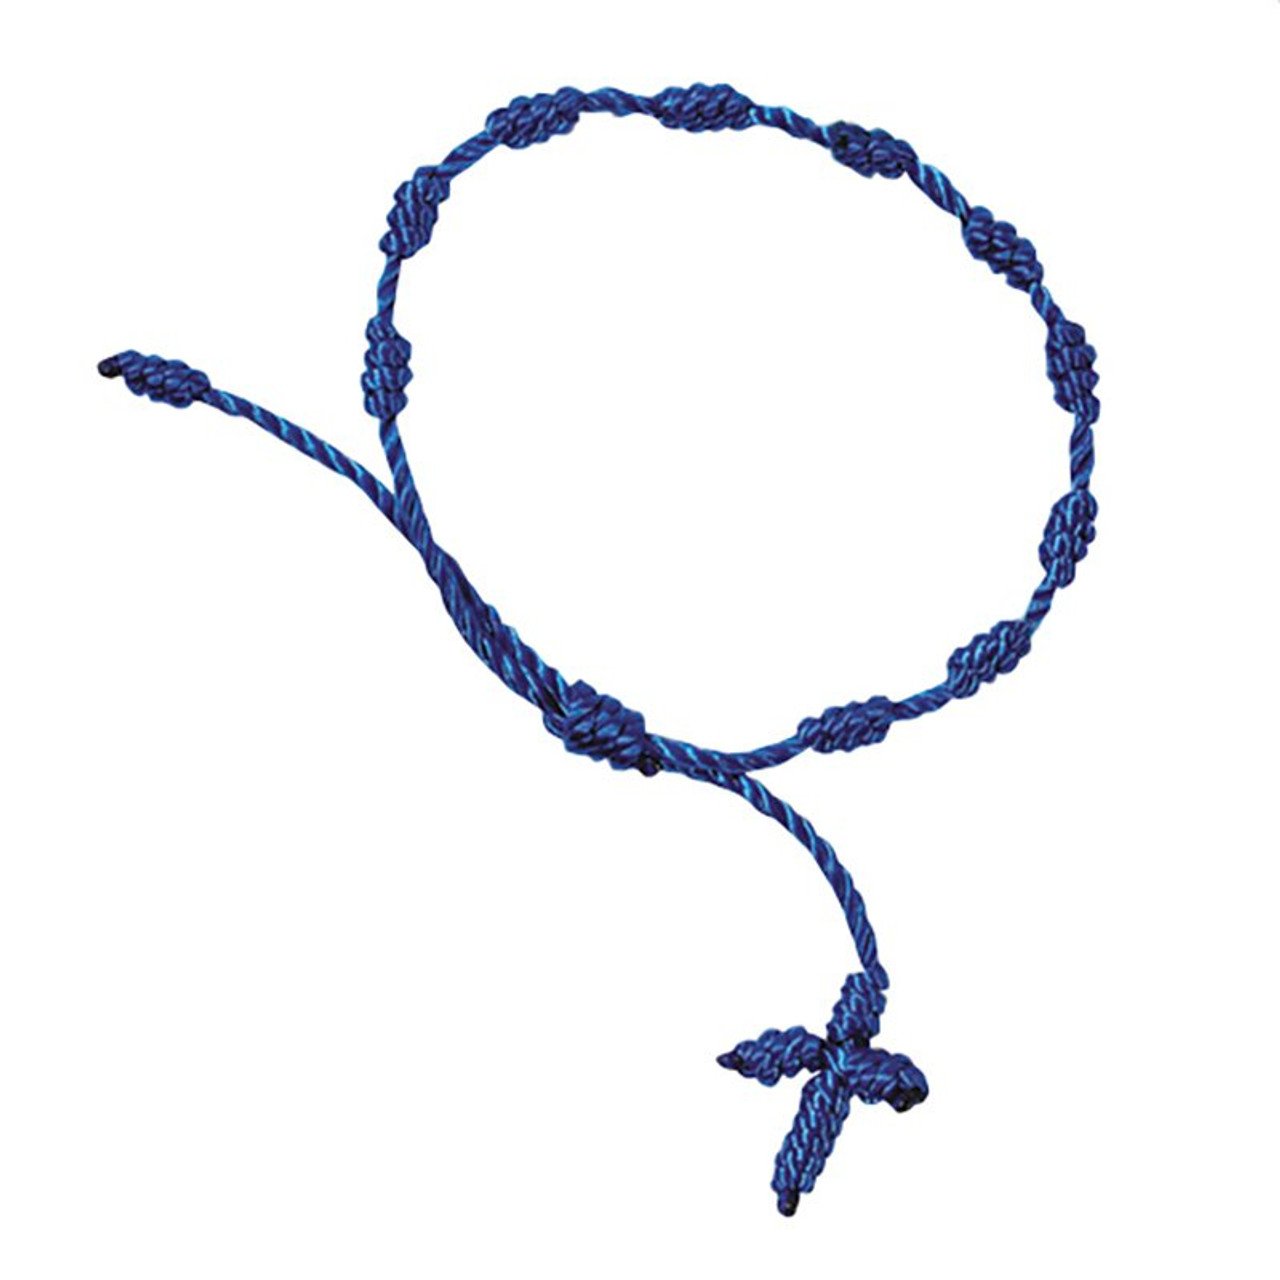 Blue Knotted Cord Rosary Bracelet - 48/pk - [Consumer]Autom